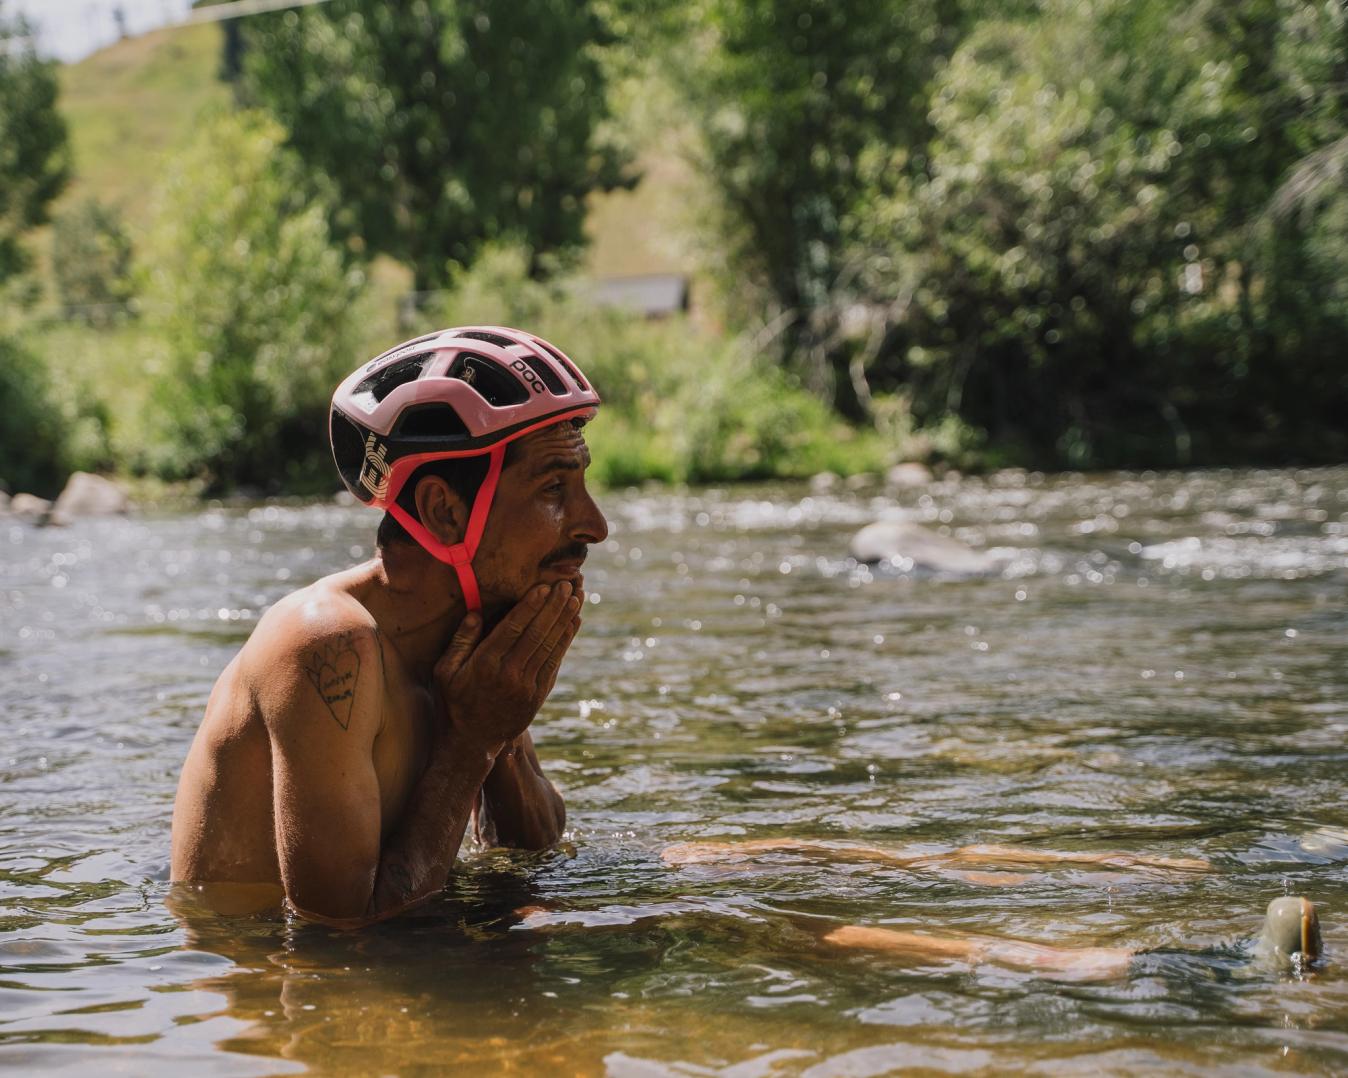 Lachlan Morton found the river to cool off after his race